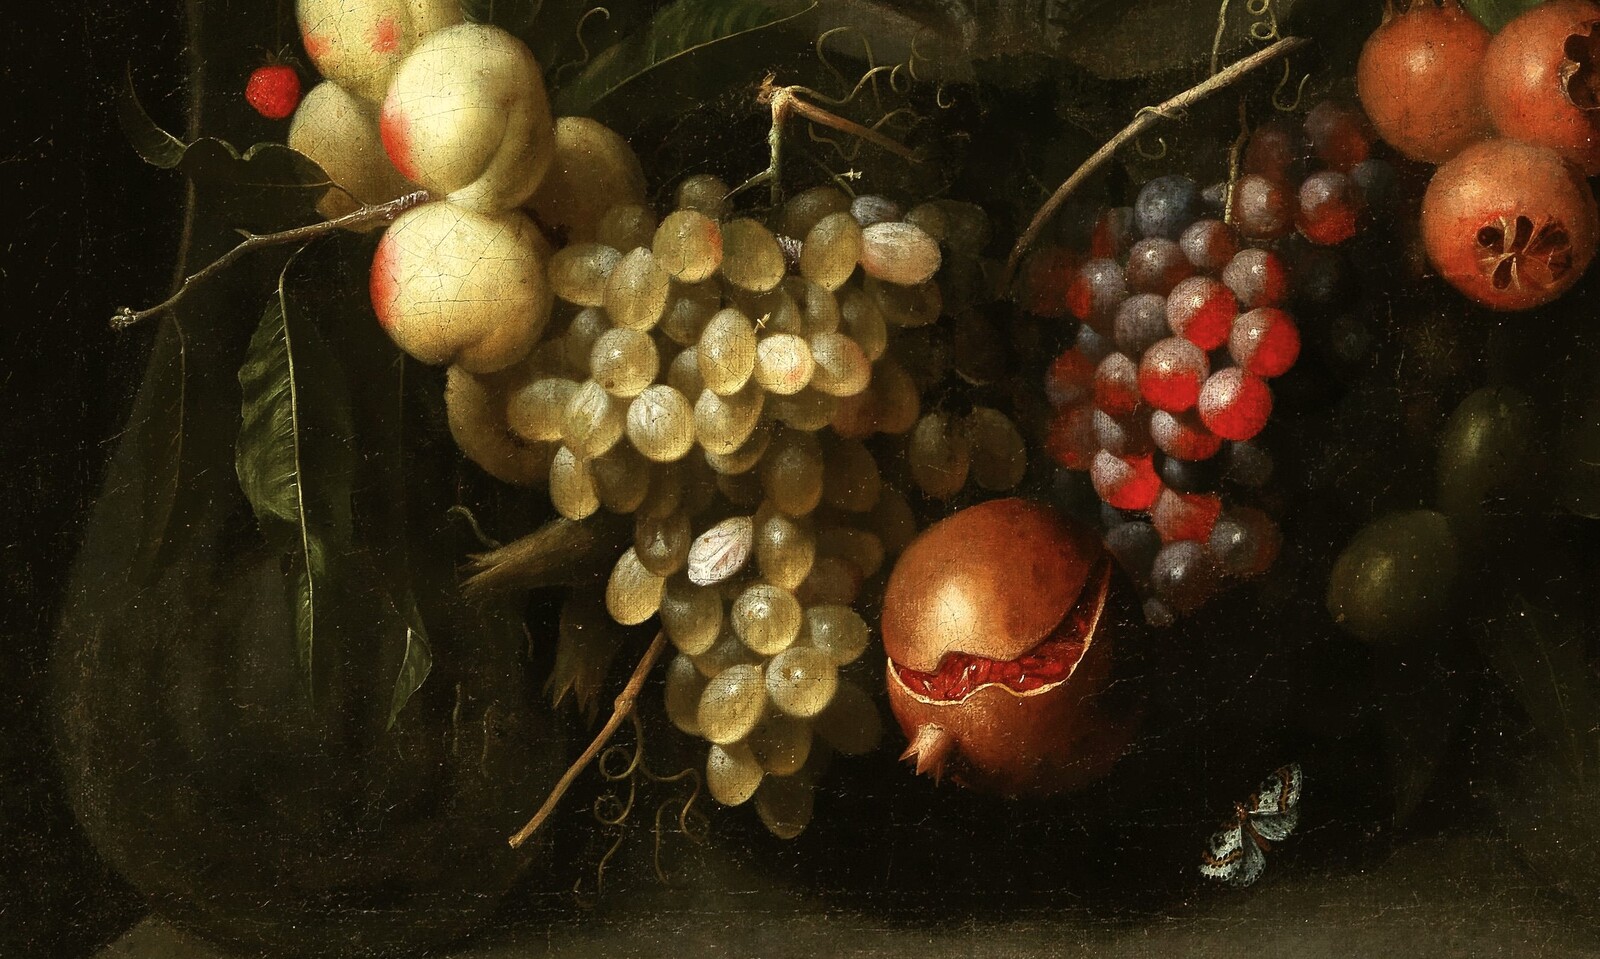 Garlands of fruit adorning a stone cartouche with Joseph and the Christ Child